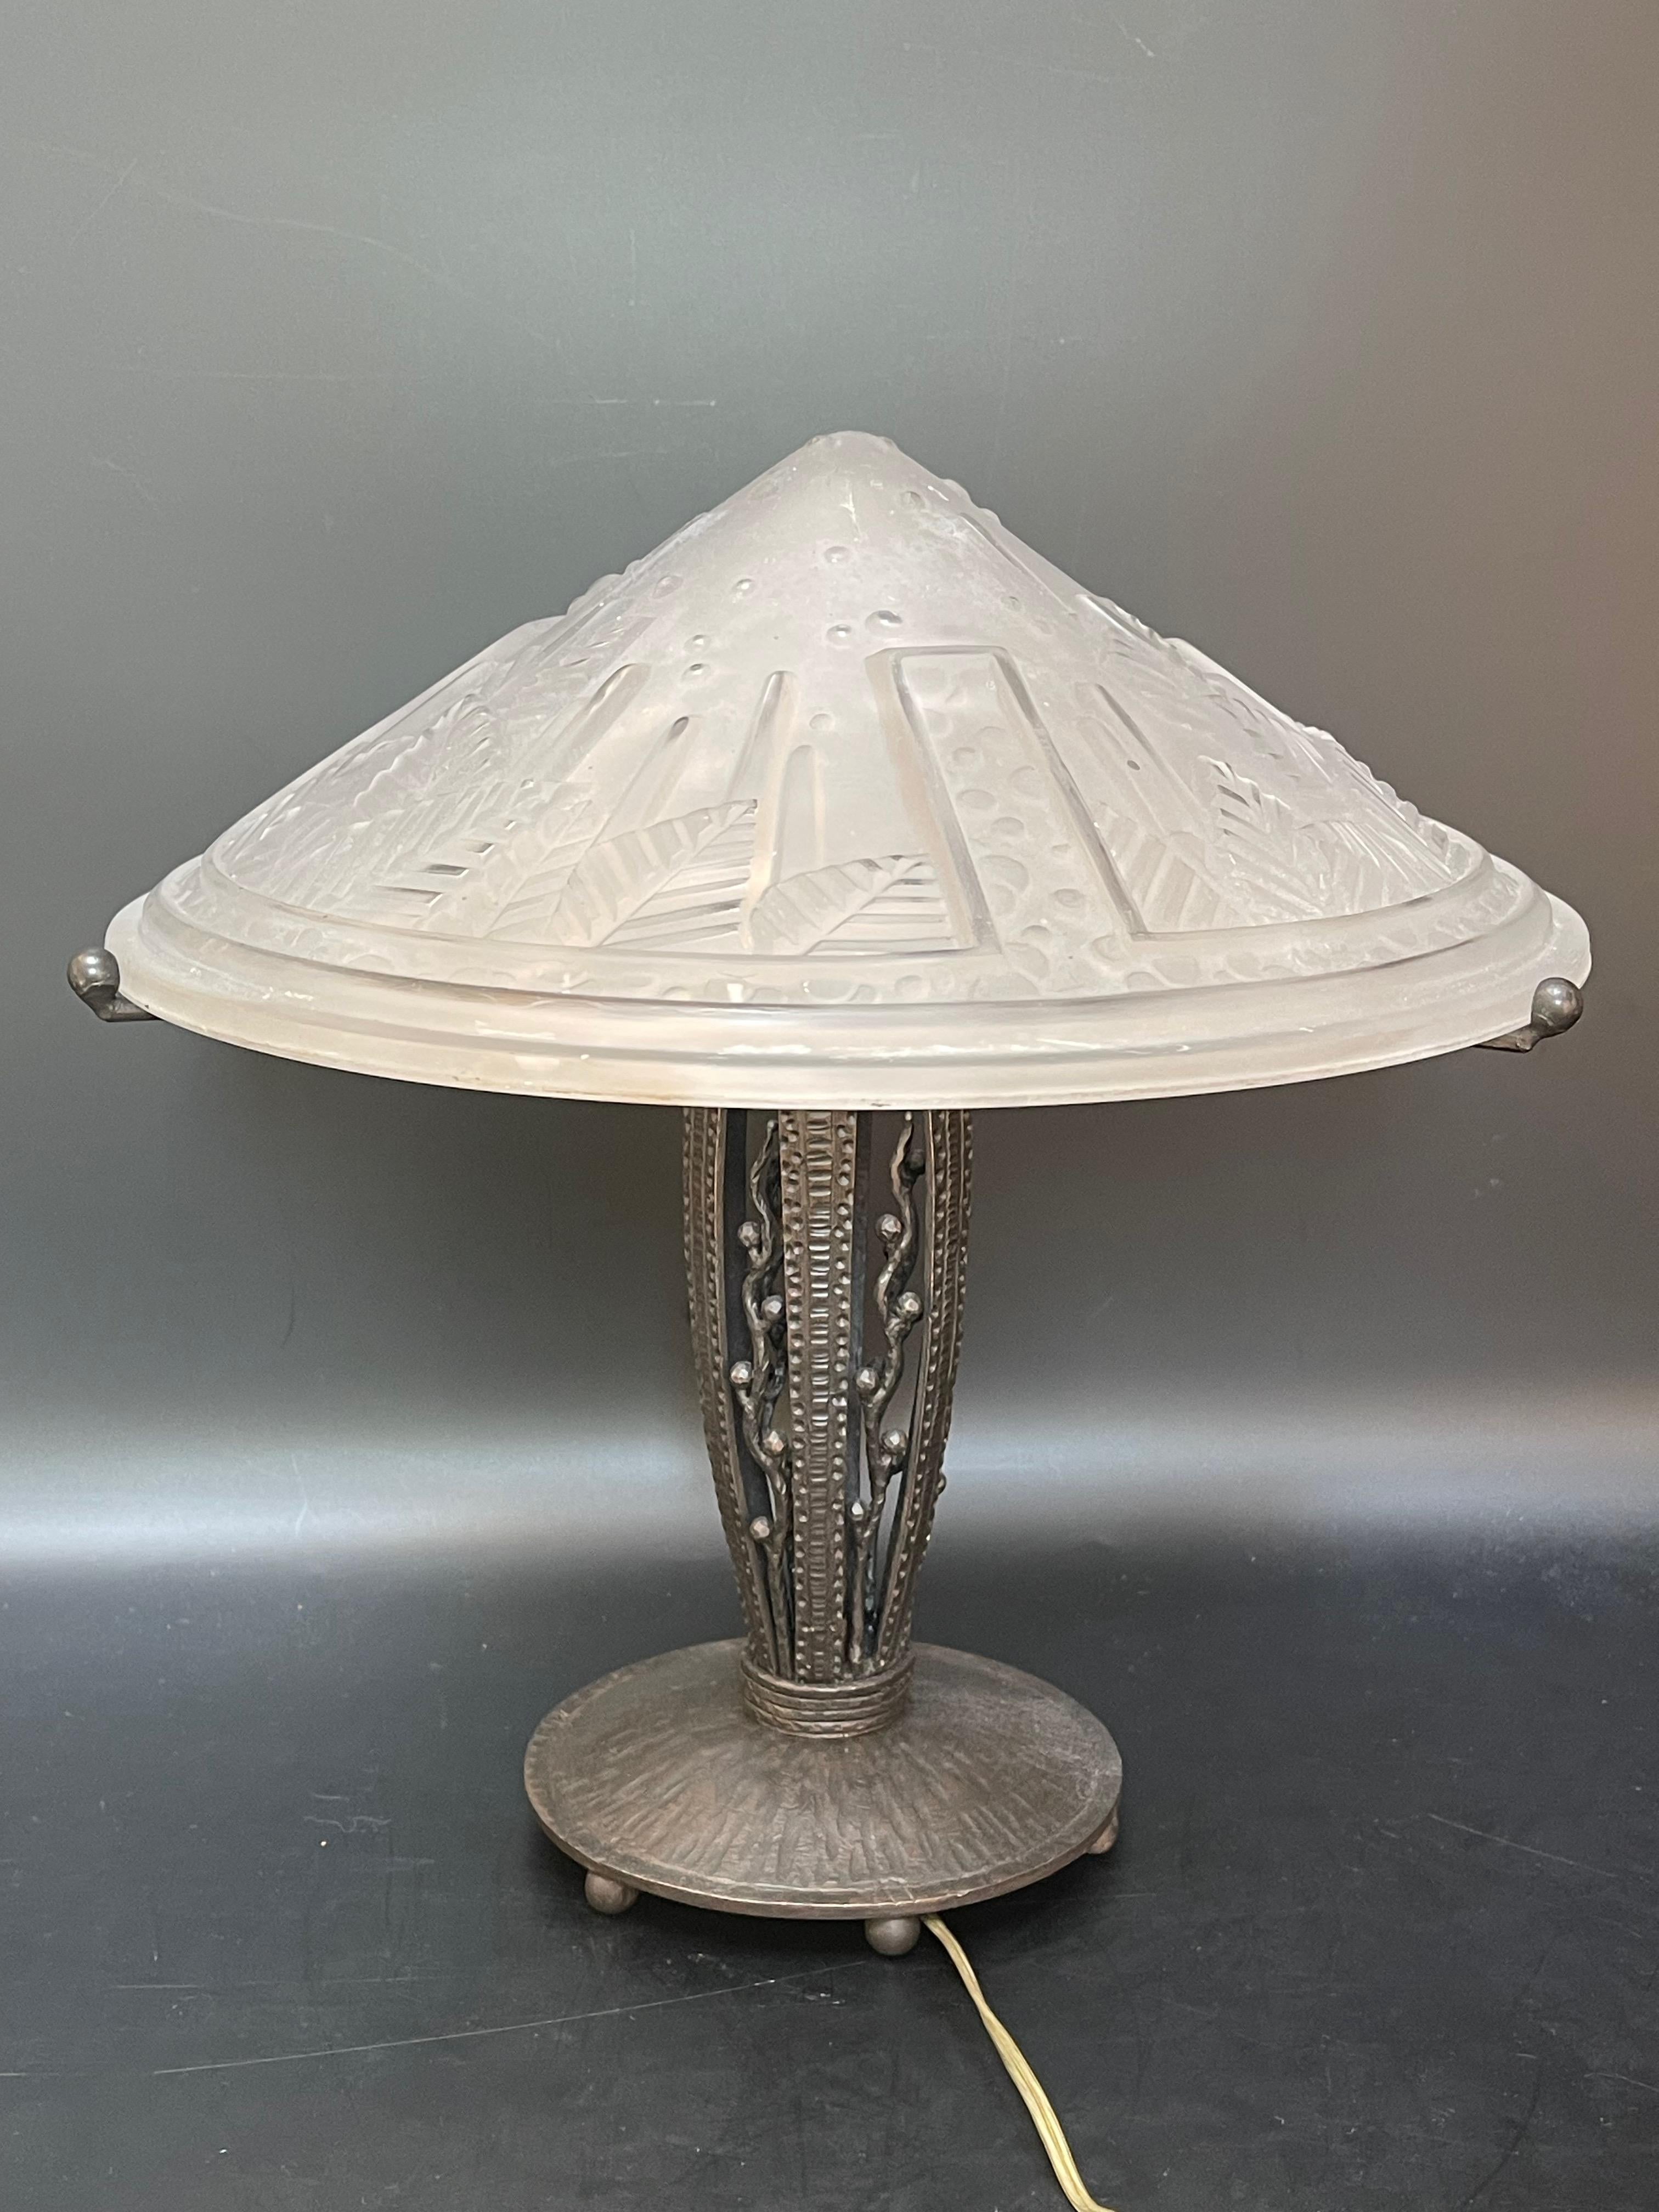 Art deco lamp circa 1930.
Wrought iron foot and molded glass shell signed Muller Frères.
Electrified and in perfect condition.
Diameter: 14 cm (base) 
Diameter: 31 cm (obus)
Height: 31 cm
Weight: 3,1 Kg

The Muller brothers, founders of the Muller